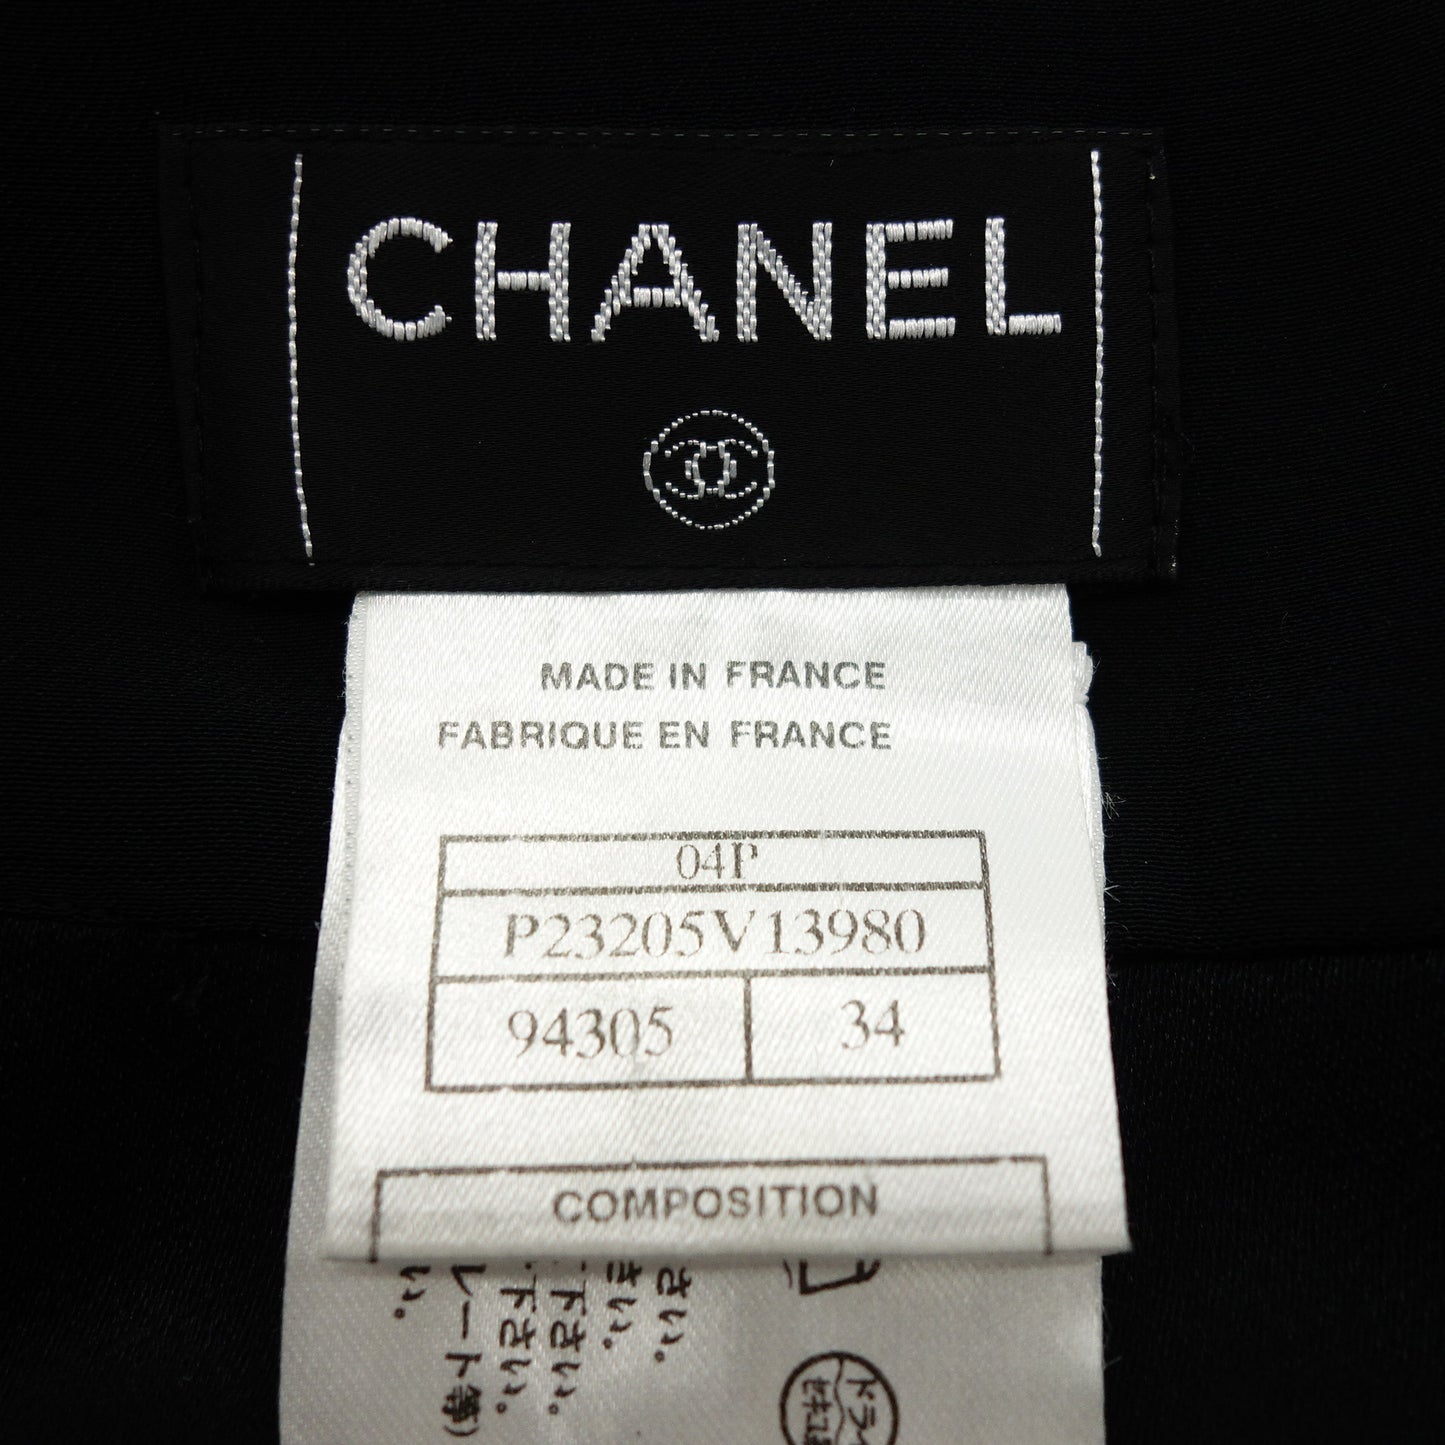 CHANEL Skirt 04P Black Size 34 Women's CHANEL [AFB22] [Used] 